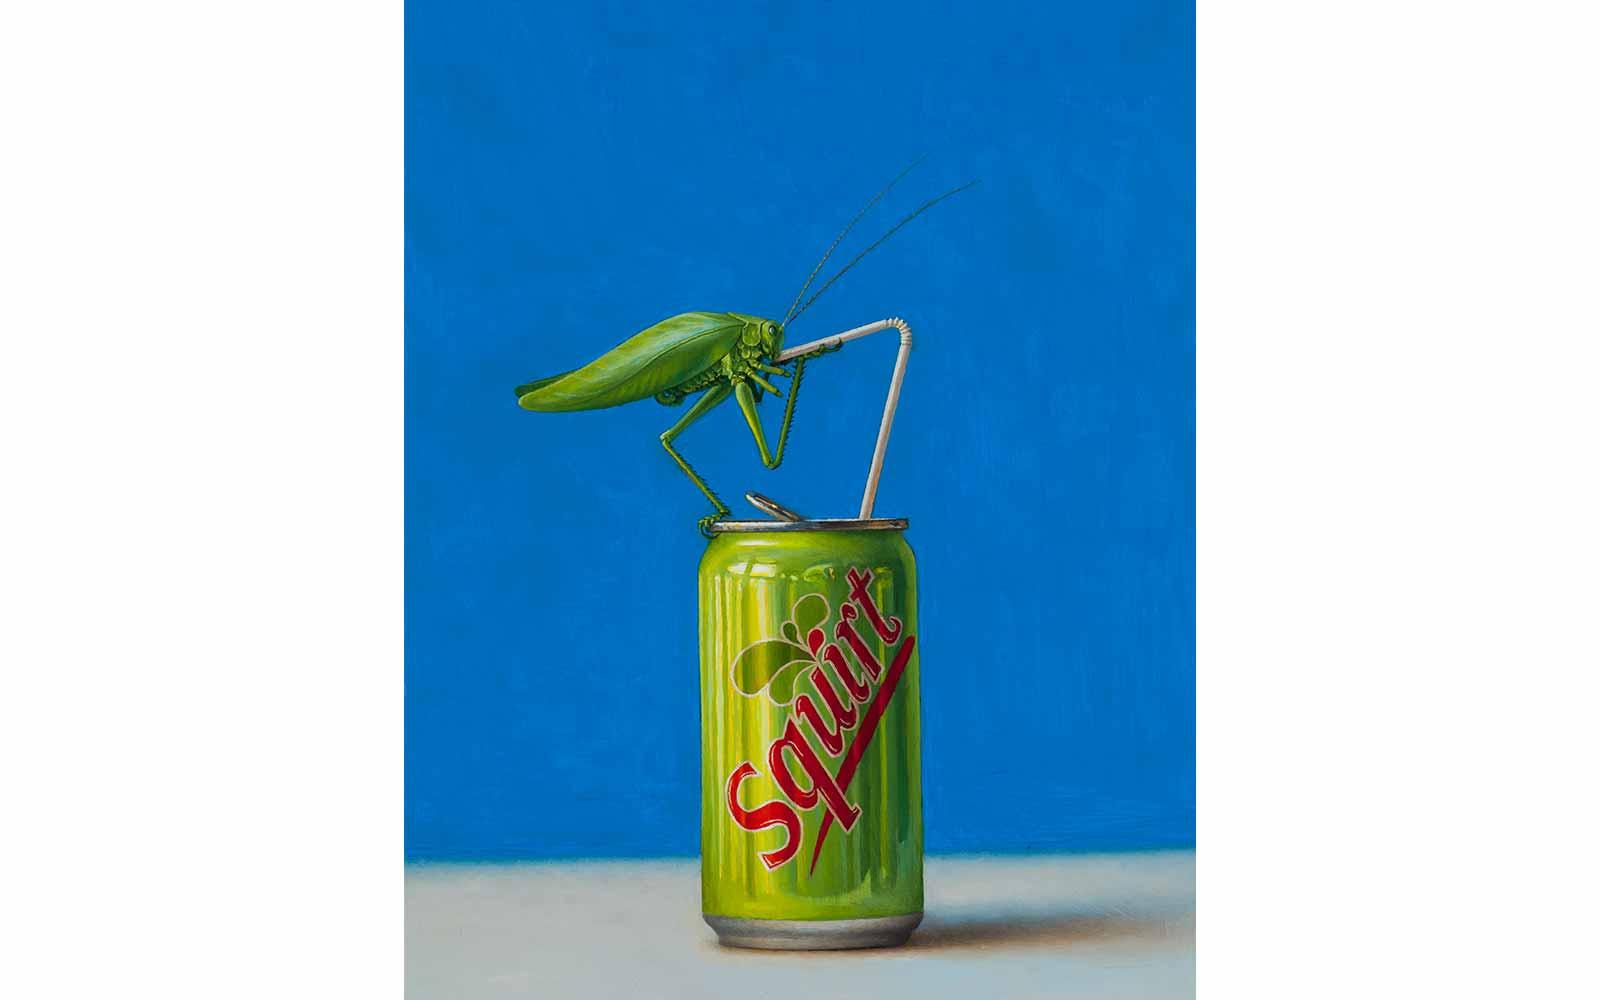 Scott Fraser, Le Sip. Oil on board. 12 x 8 inches.